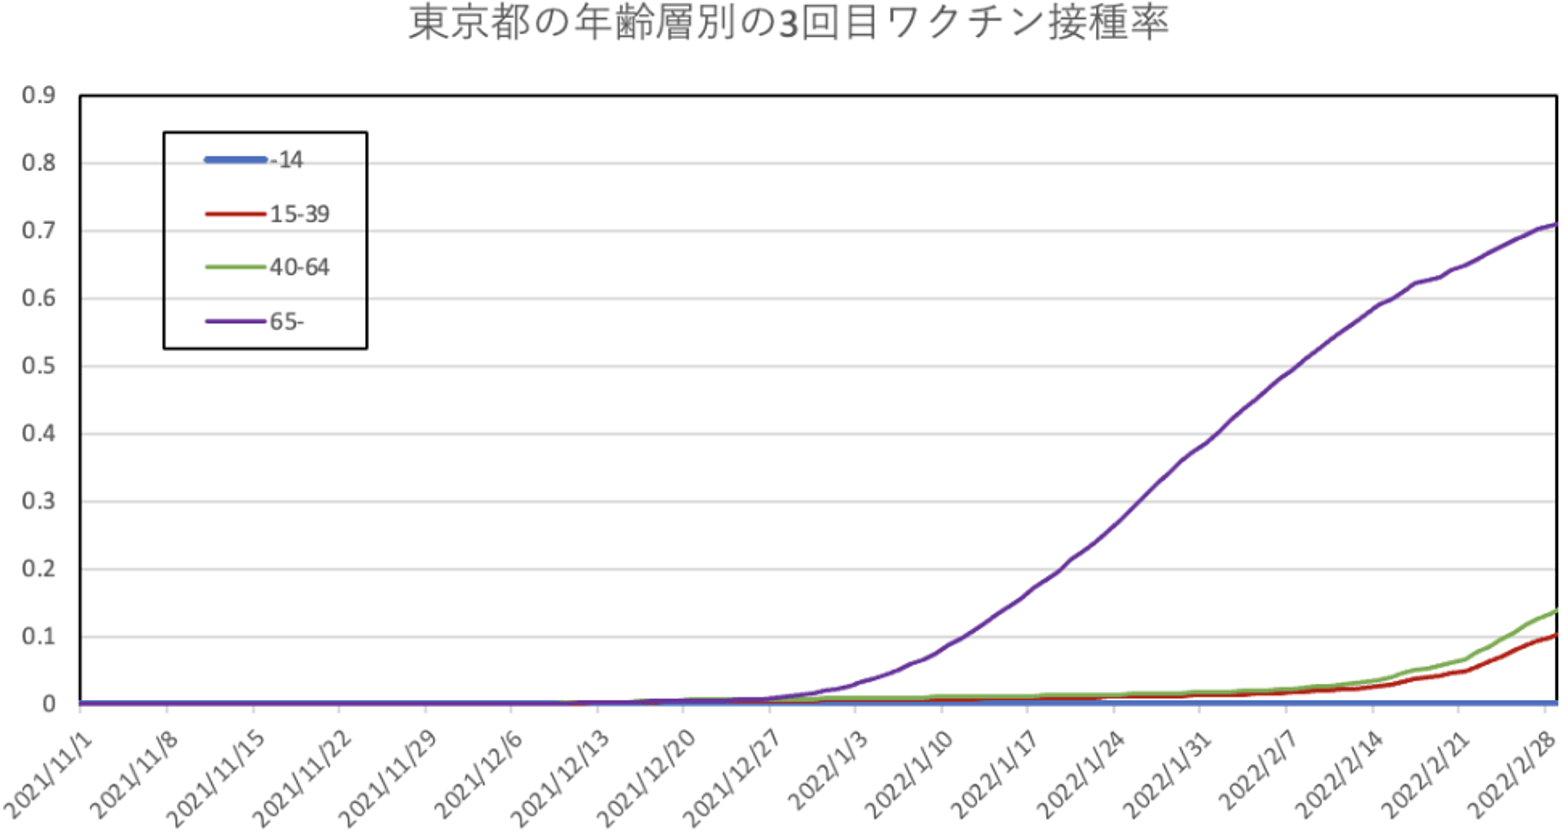 Age-specific third vaccination rate in Tokyo